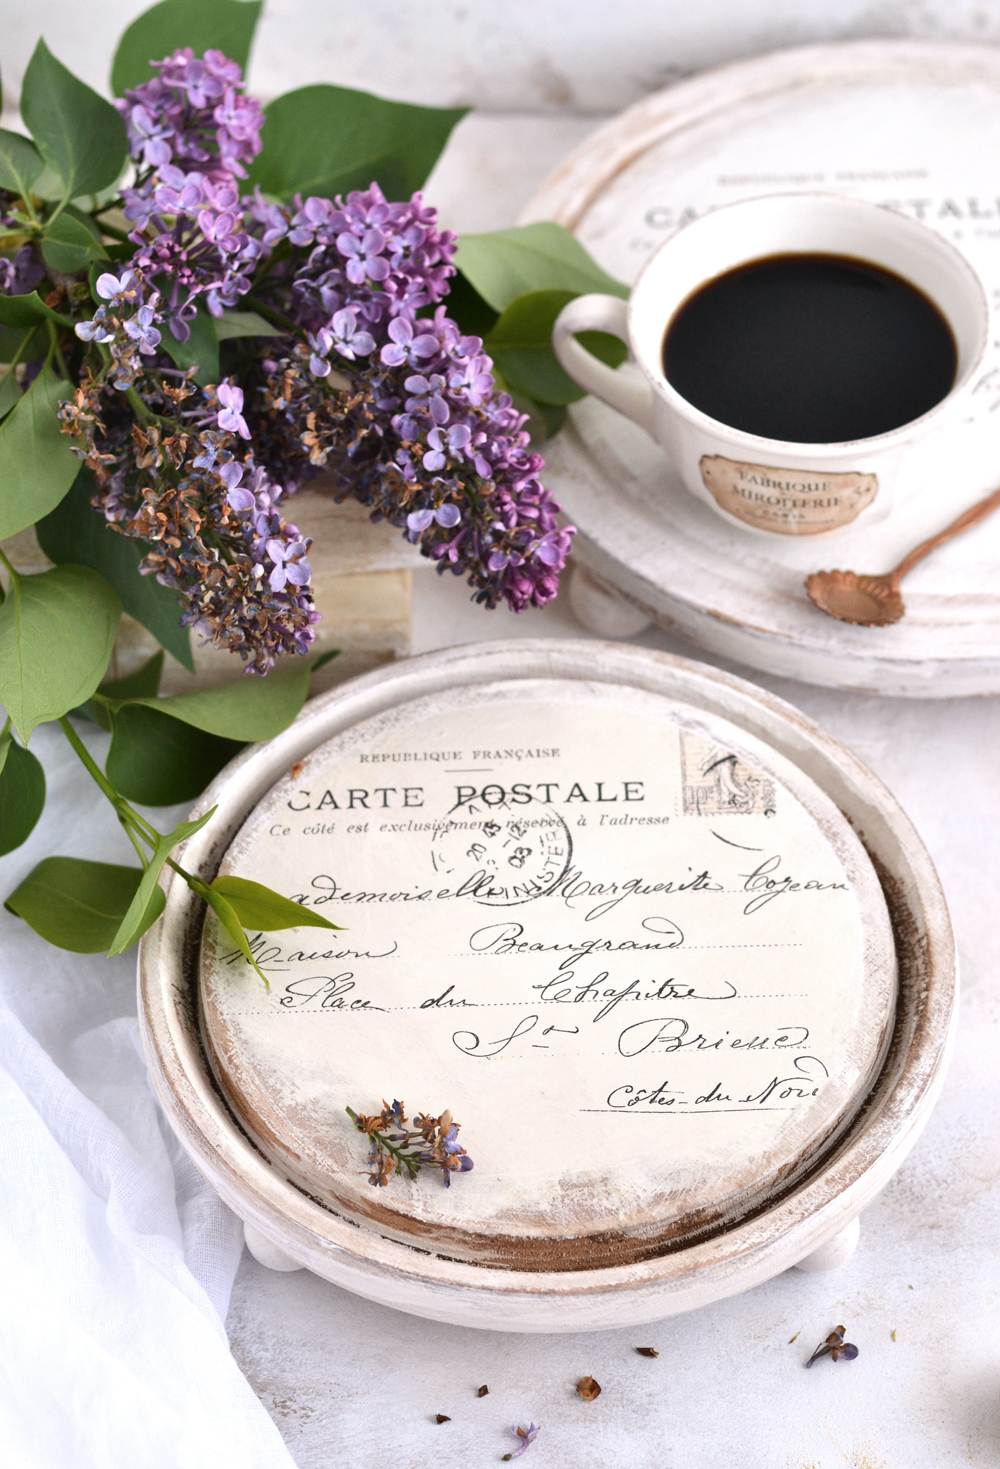 Black Coffee with lavender flower on side